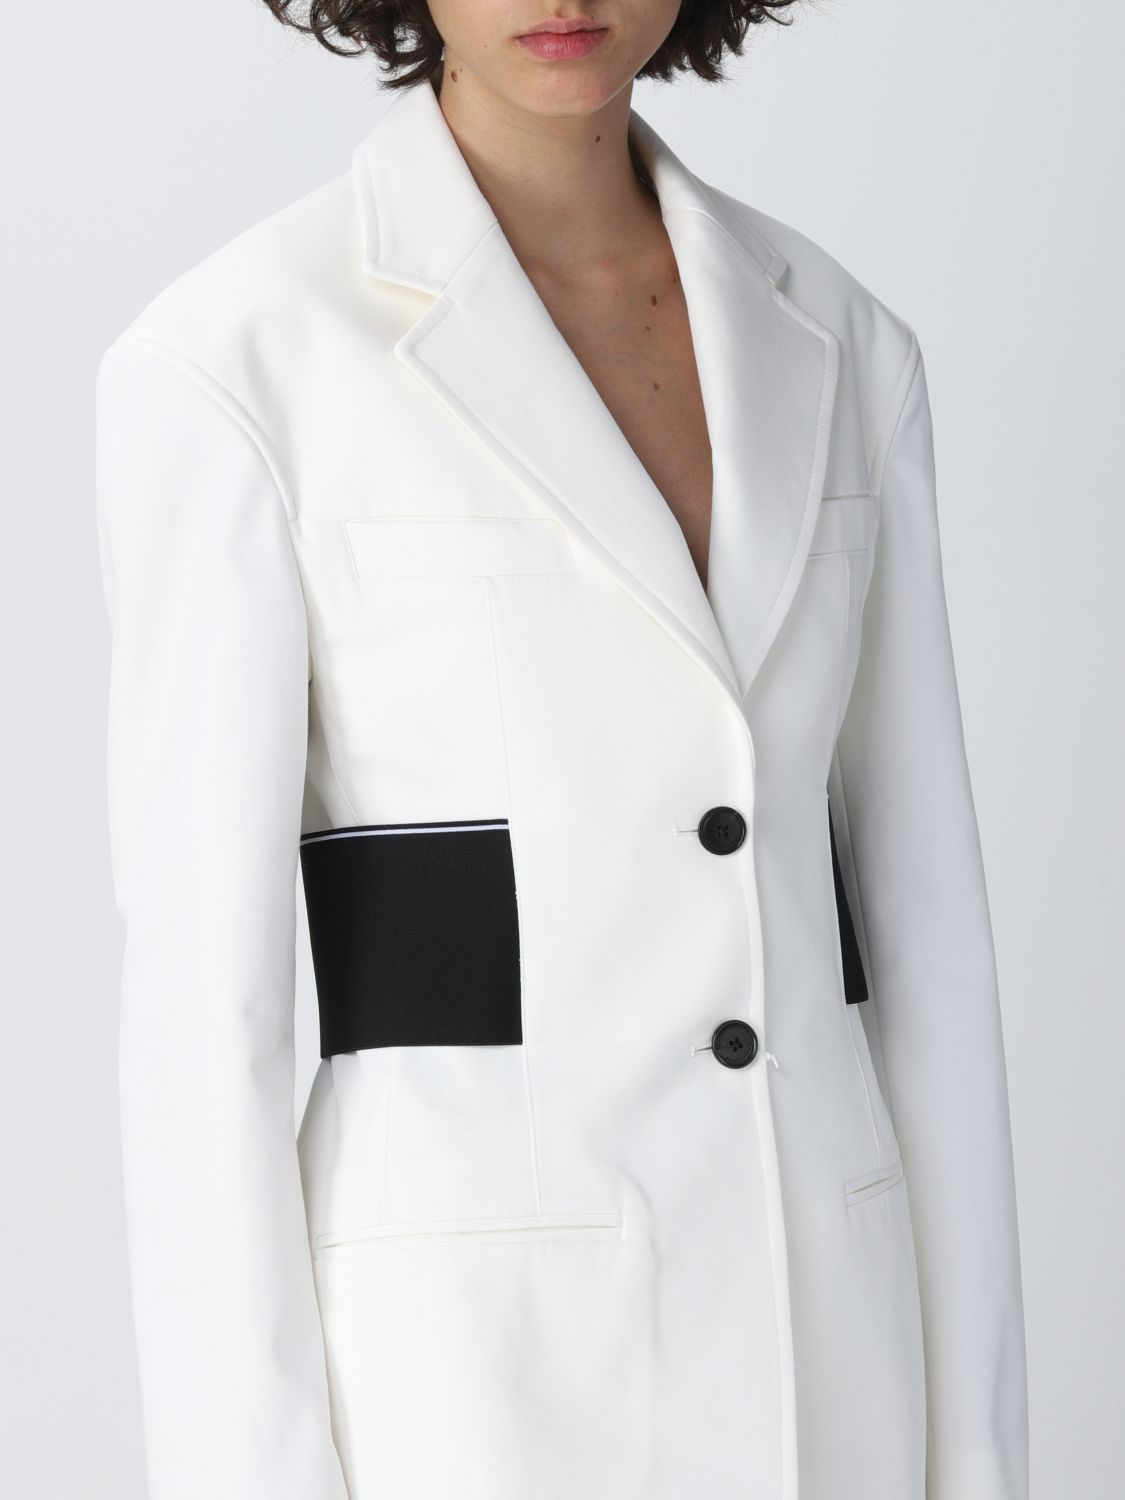 Womens Clothing Jackets Blazers Save 1% Alexander Wang Blazer In White Cotton sport coats and suit jackets 